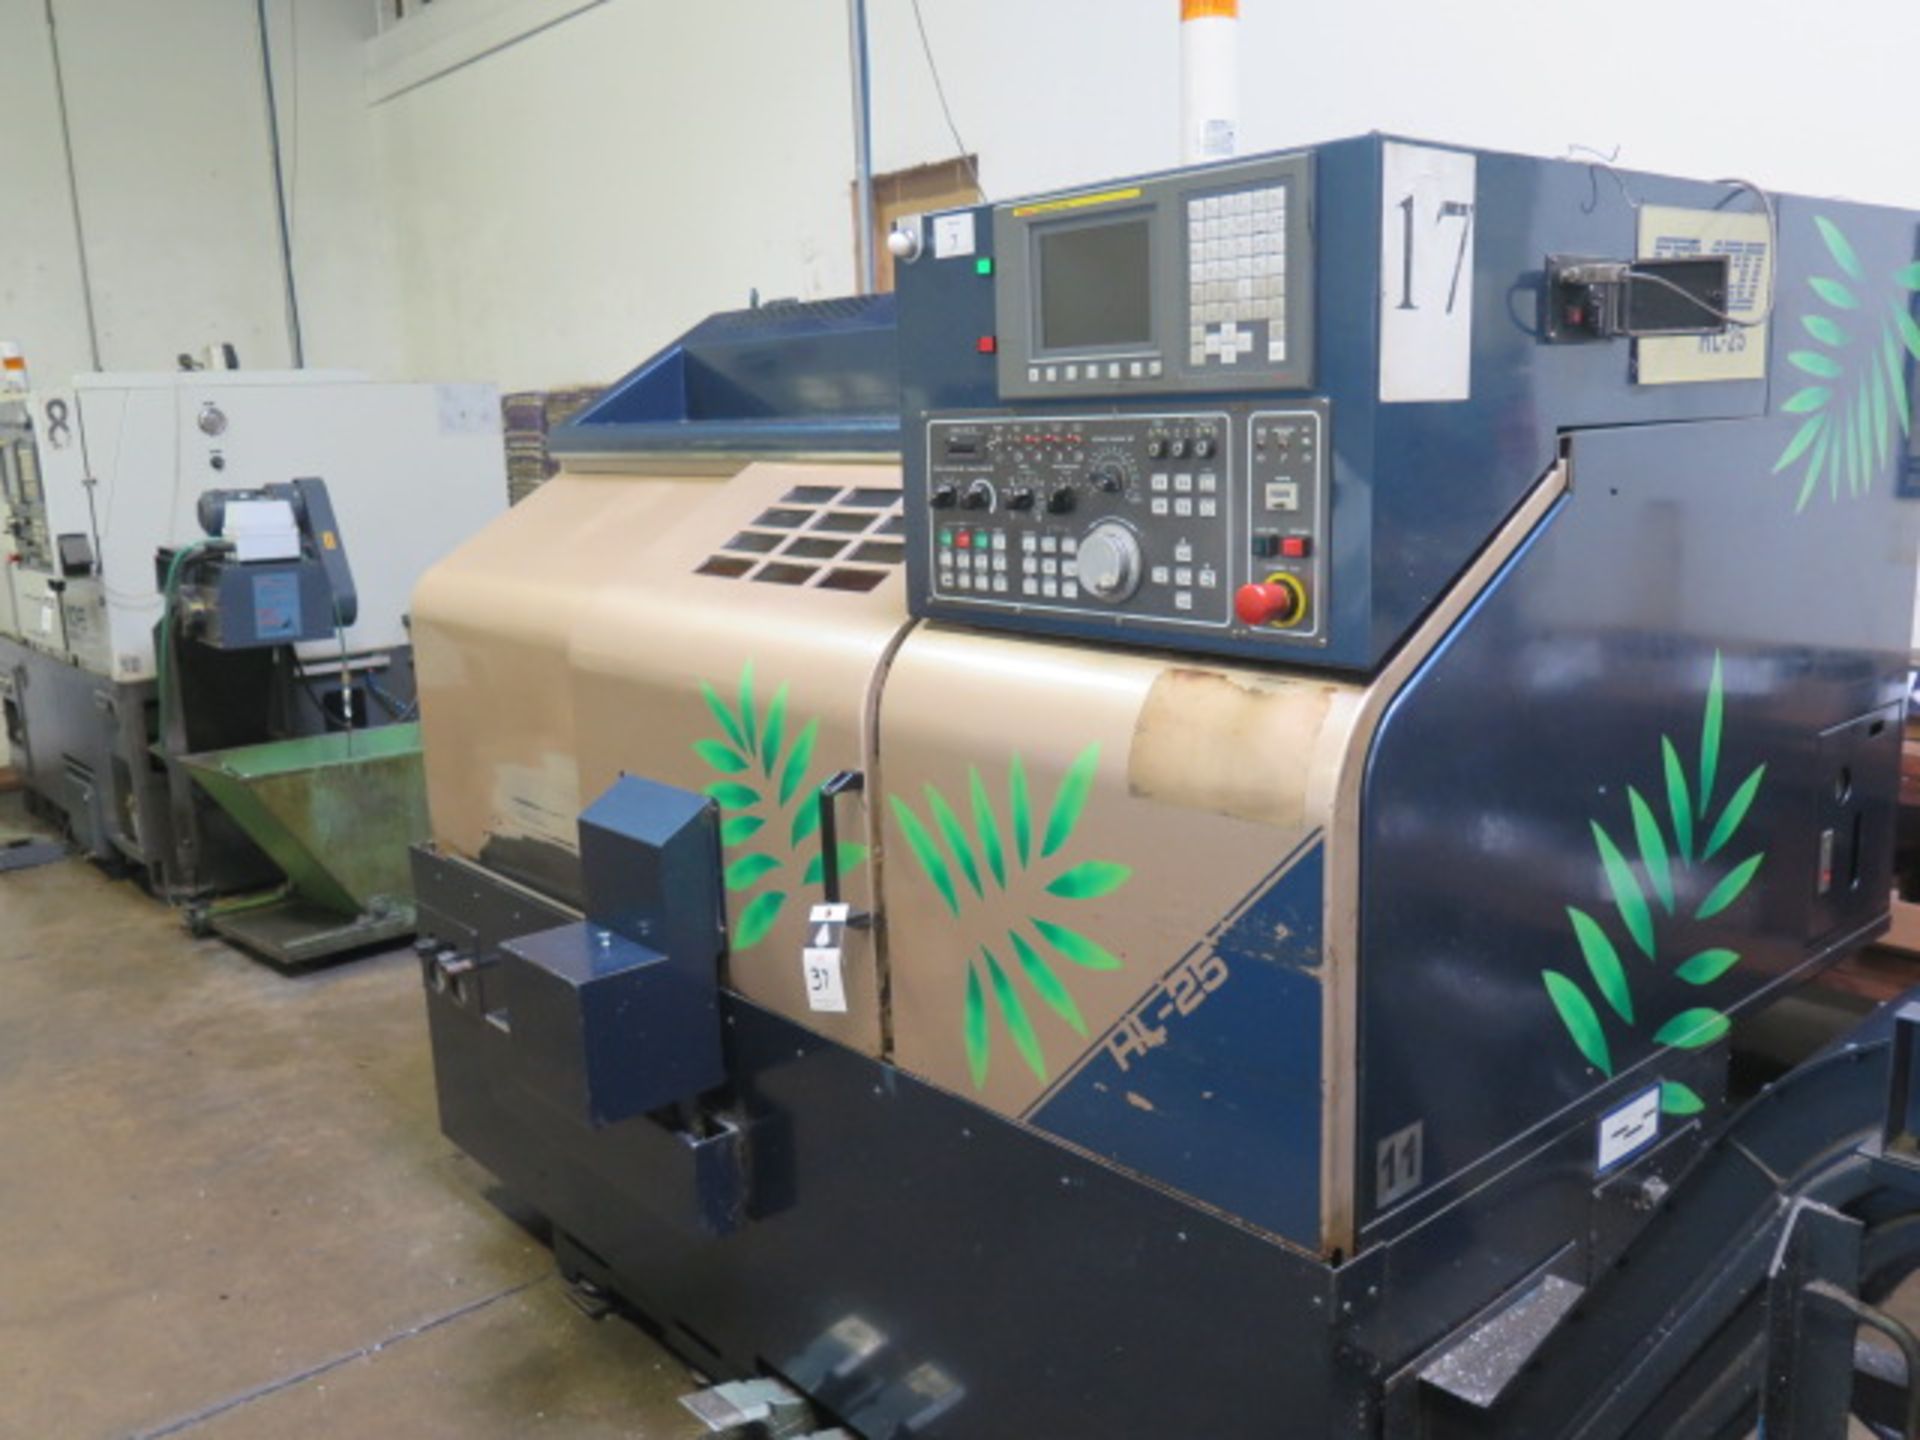 2006 Femco HL-25 CNC Turning Center s/n L16-5243 w/ Fanuc 0i-TC Controls, Tool Presetter, SOLD AS IS - Image 3 of 13